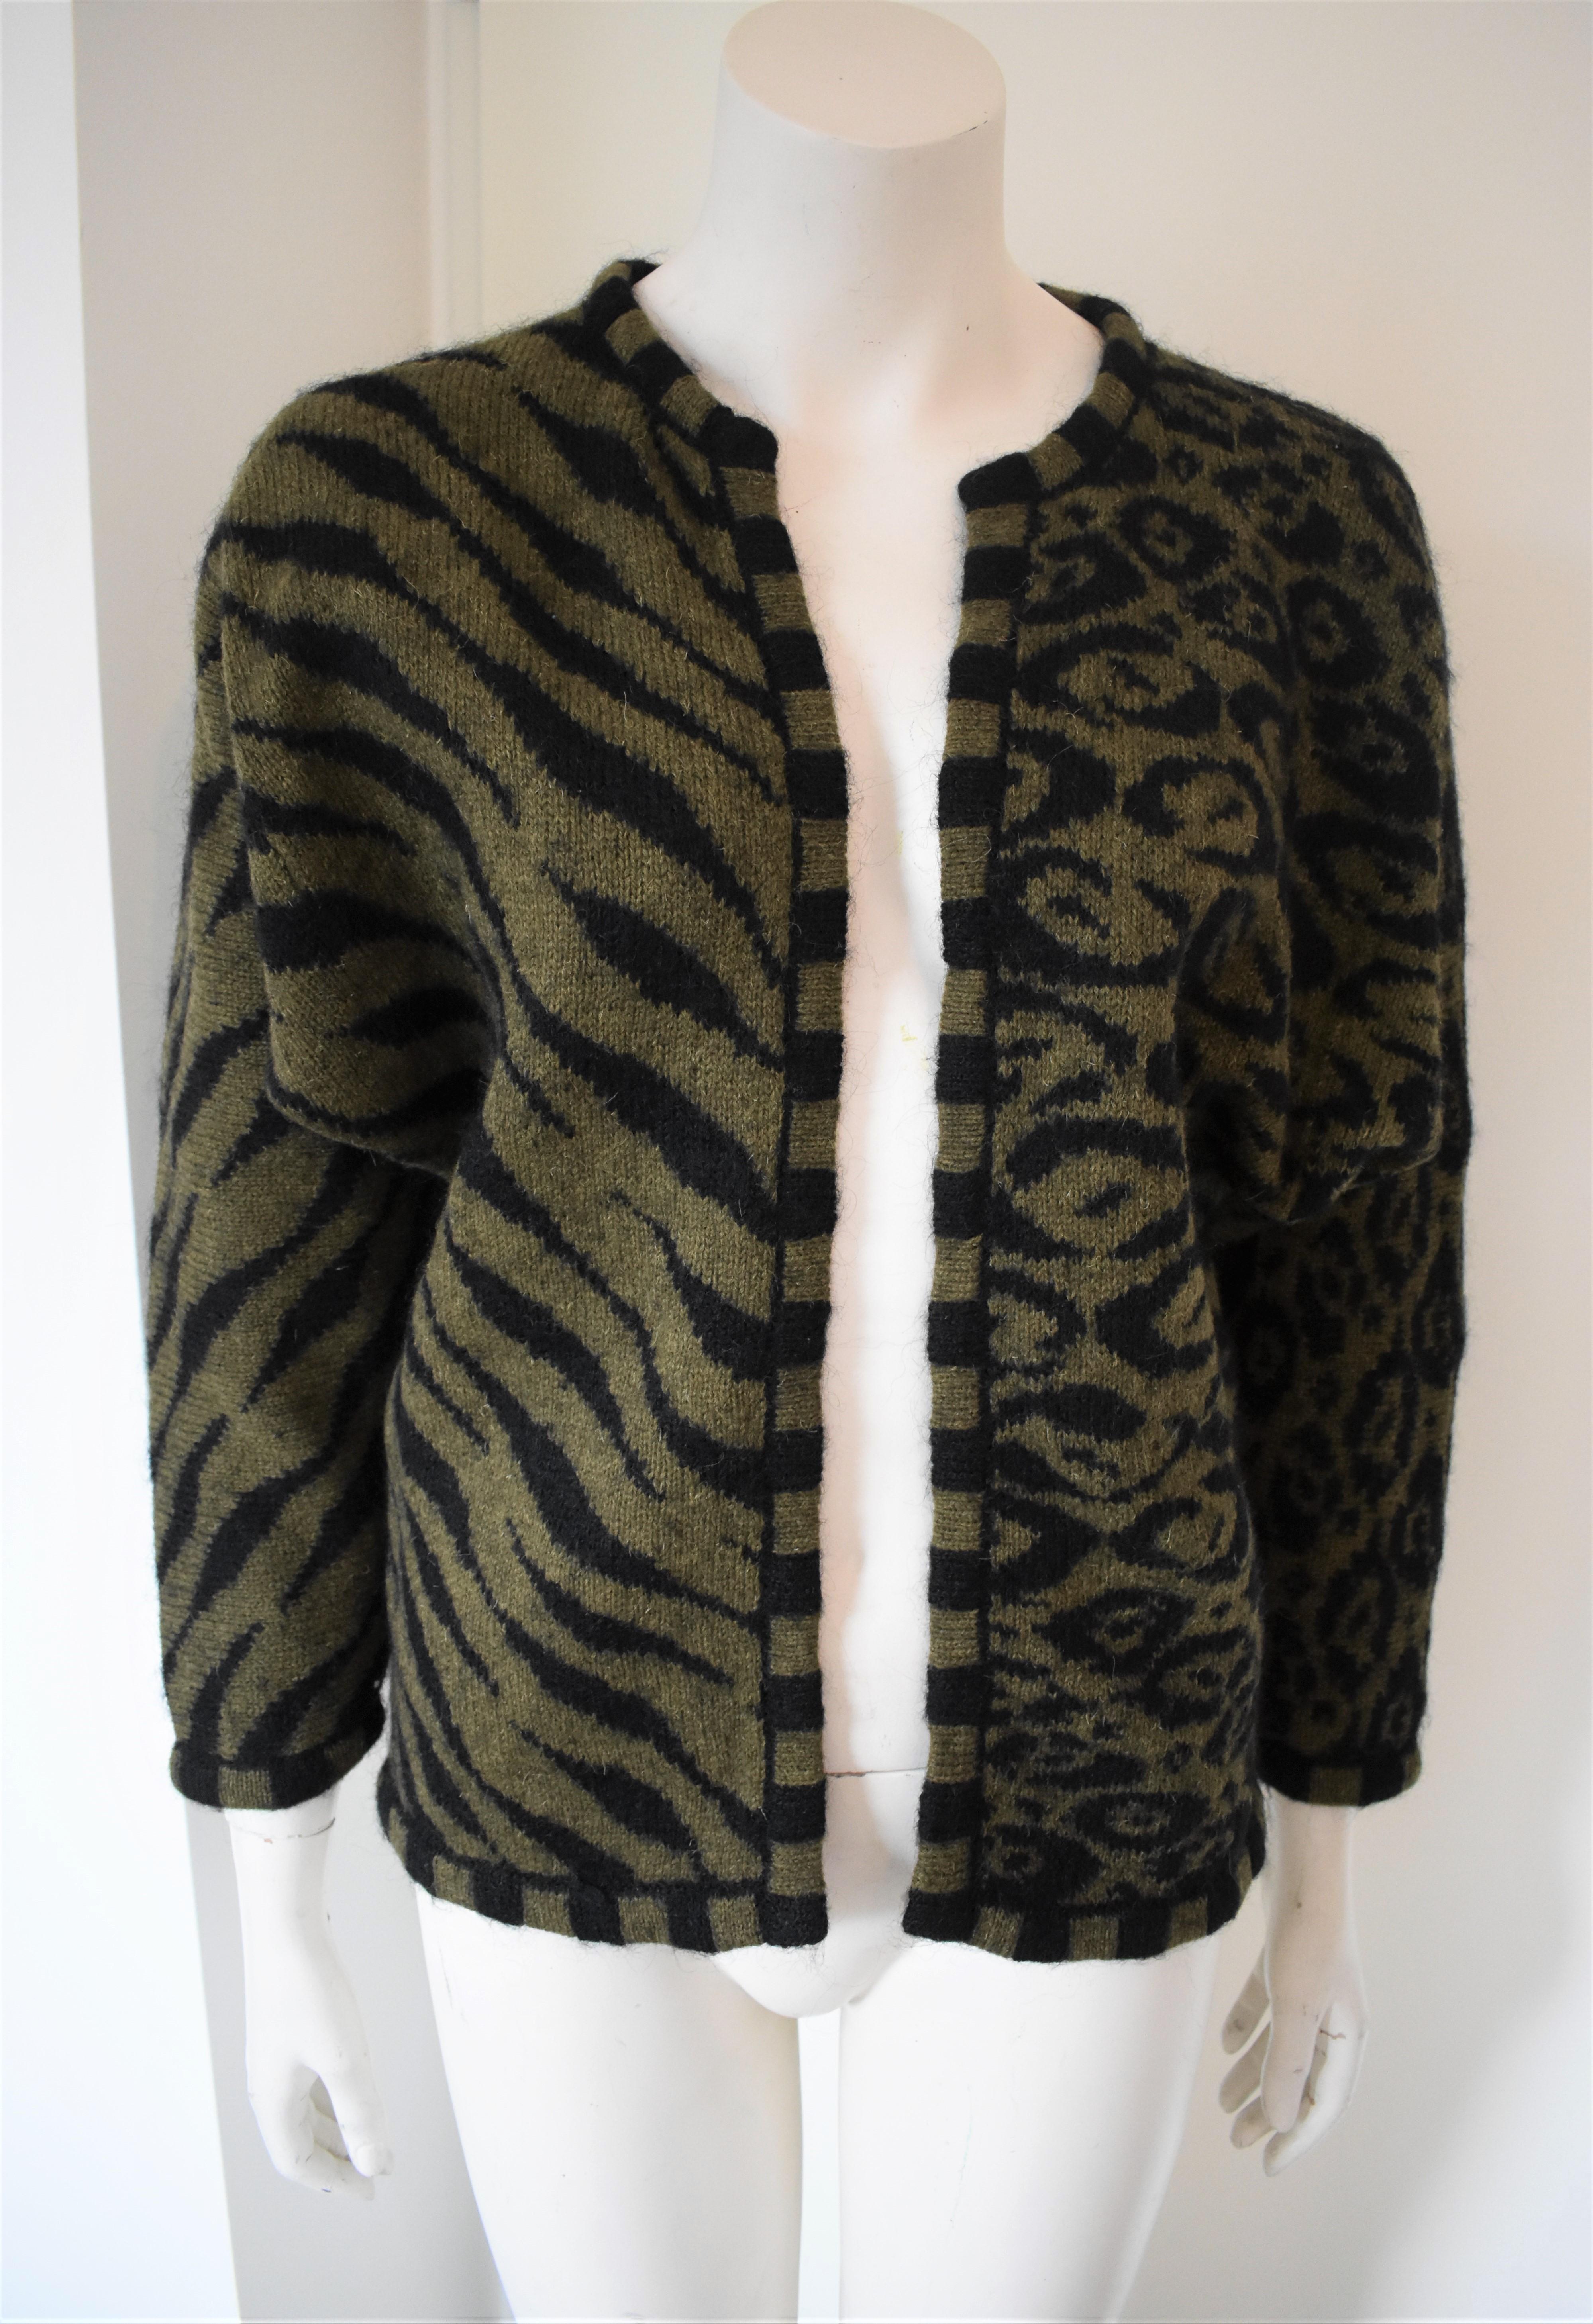 A vintage wool cardigan in a cool dark-green and black asymmetrical print, by the famous Japansese designer Kansai Yamamoto.
Before shipping, the cardigan will be sent to a specialist for a complementary dry cleaning, so it will be perfect and ready